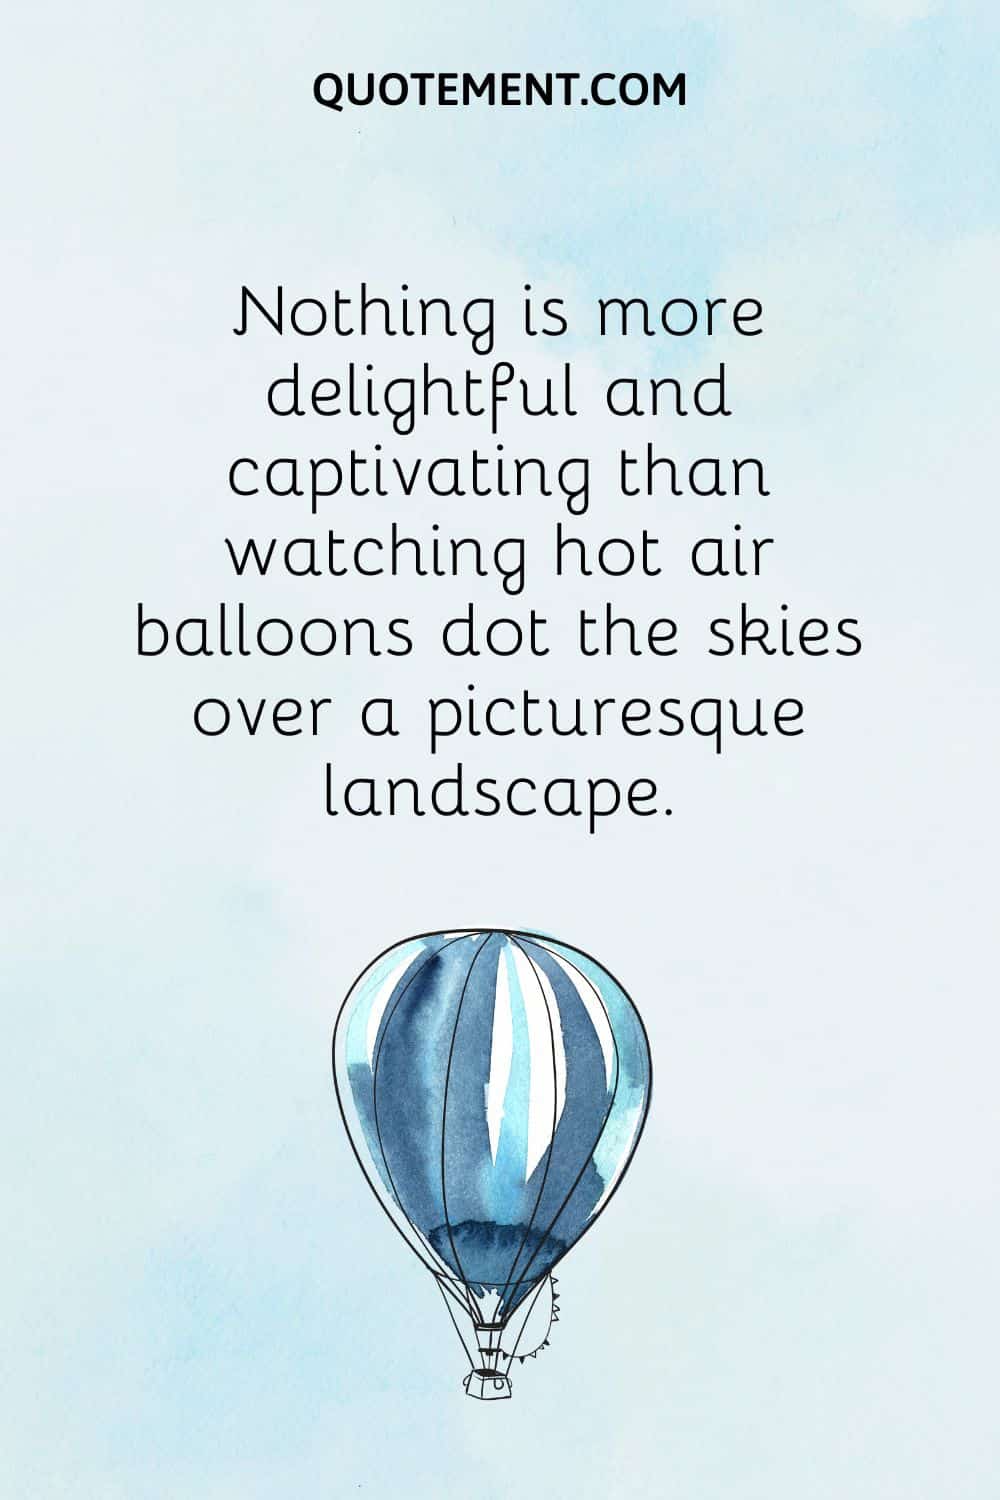 Nothing is more delightful and captivating than watching hot air balloons dot the skies over a picturesque landscape